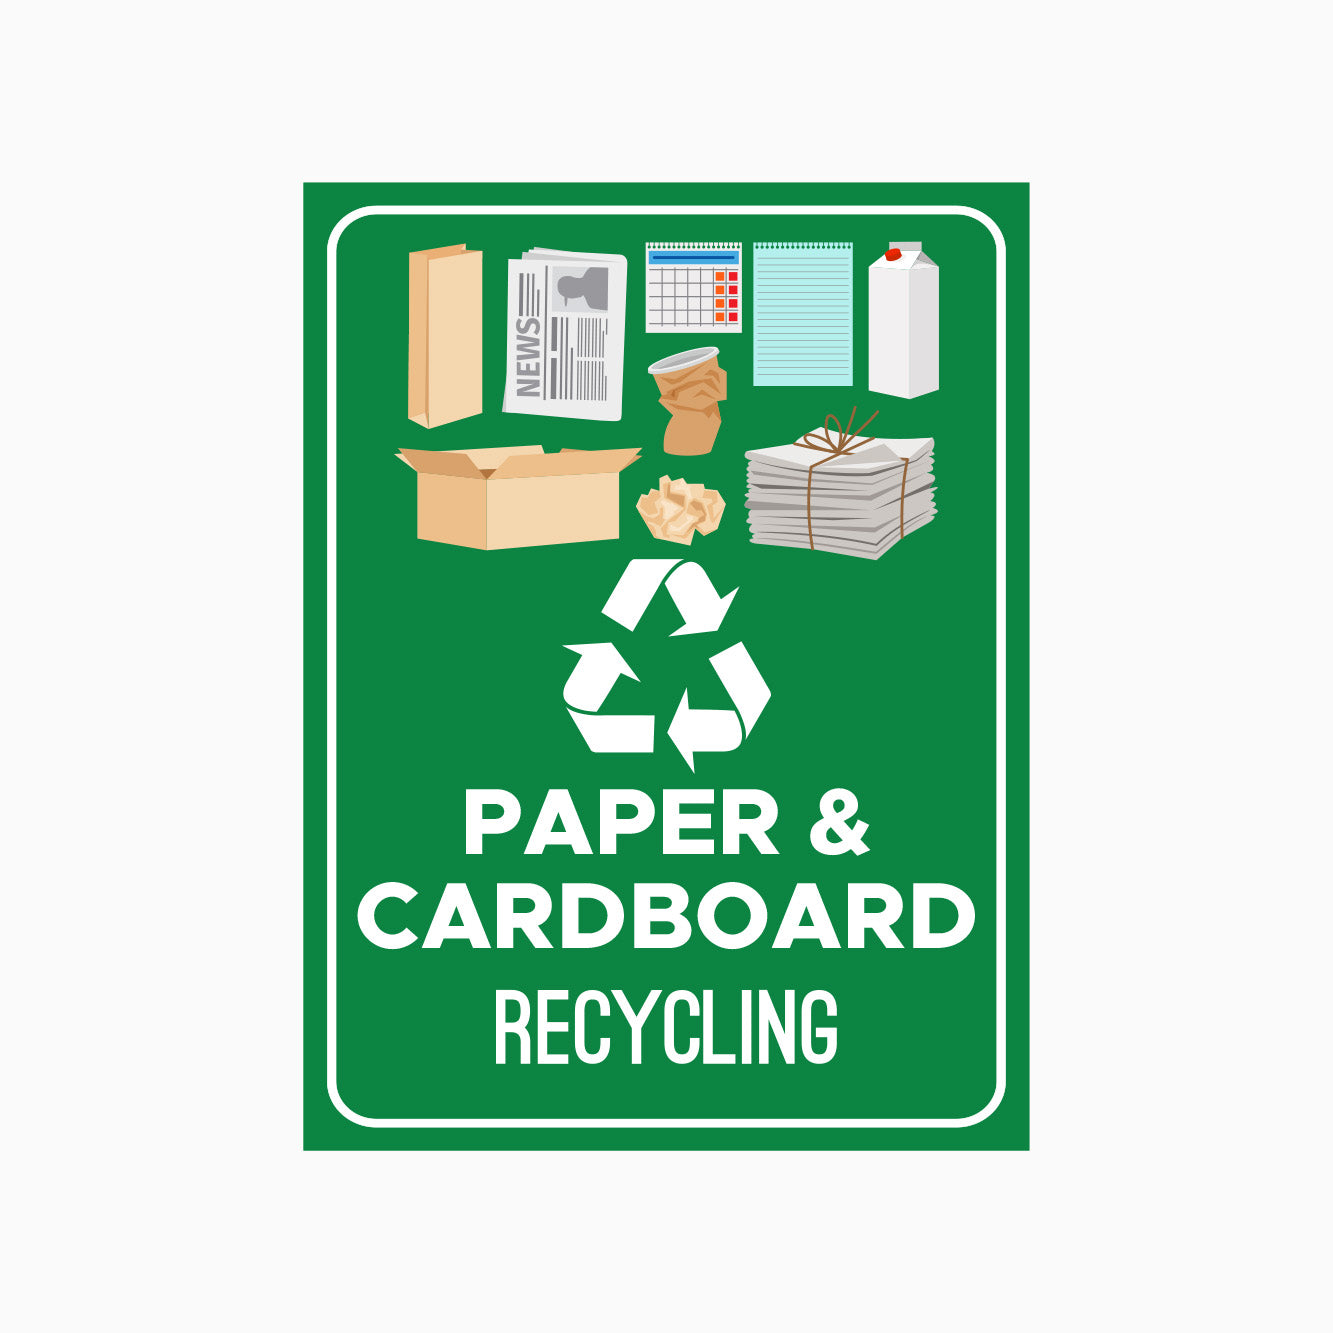 PAPER & CARDBOARD RECYCLING SIGN - get signs